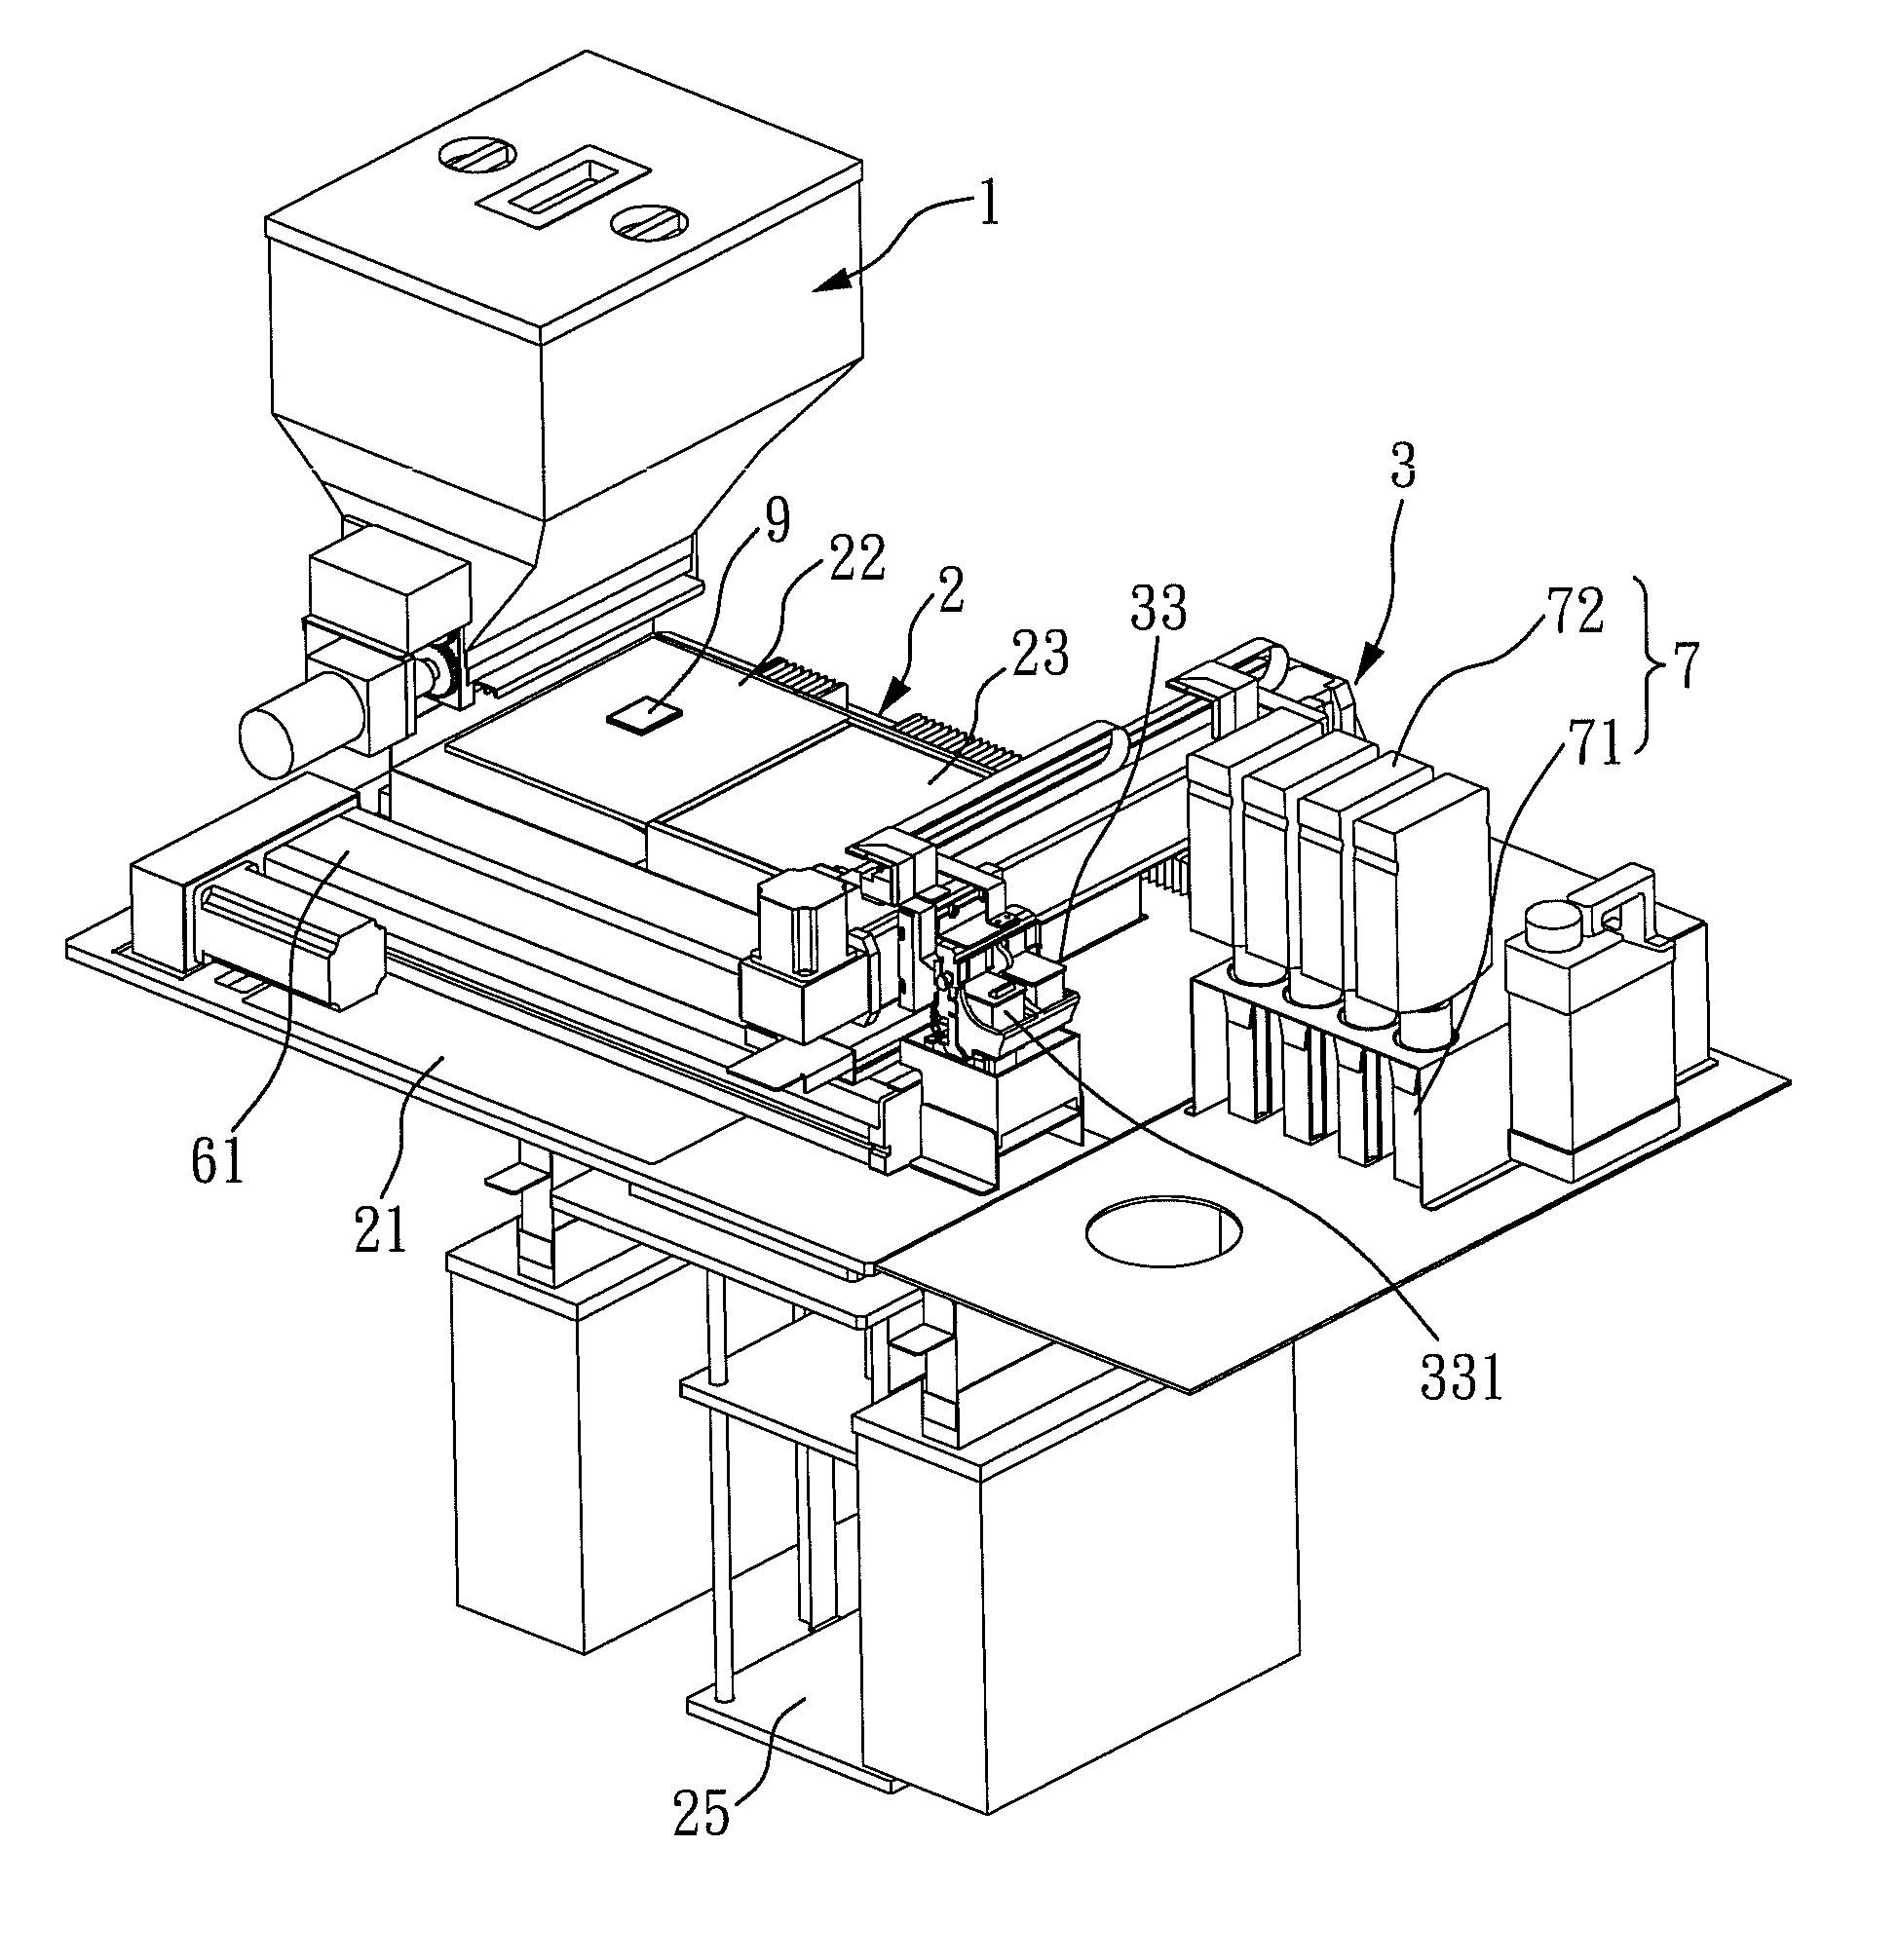 Three-dimensional object-forming apparatus